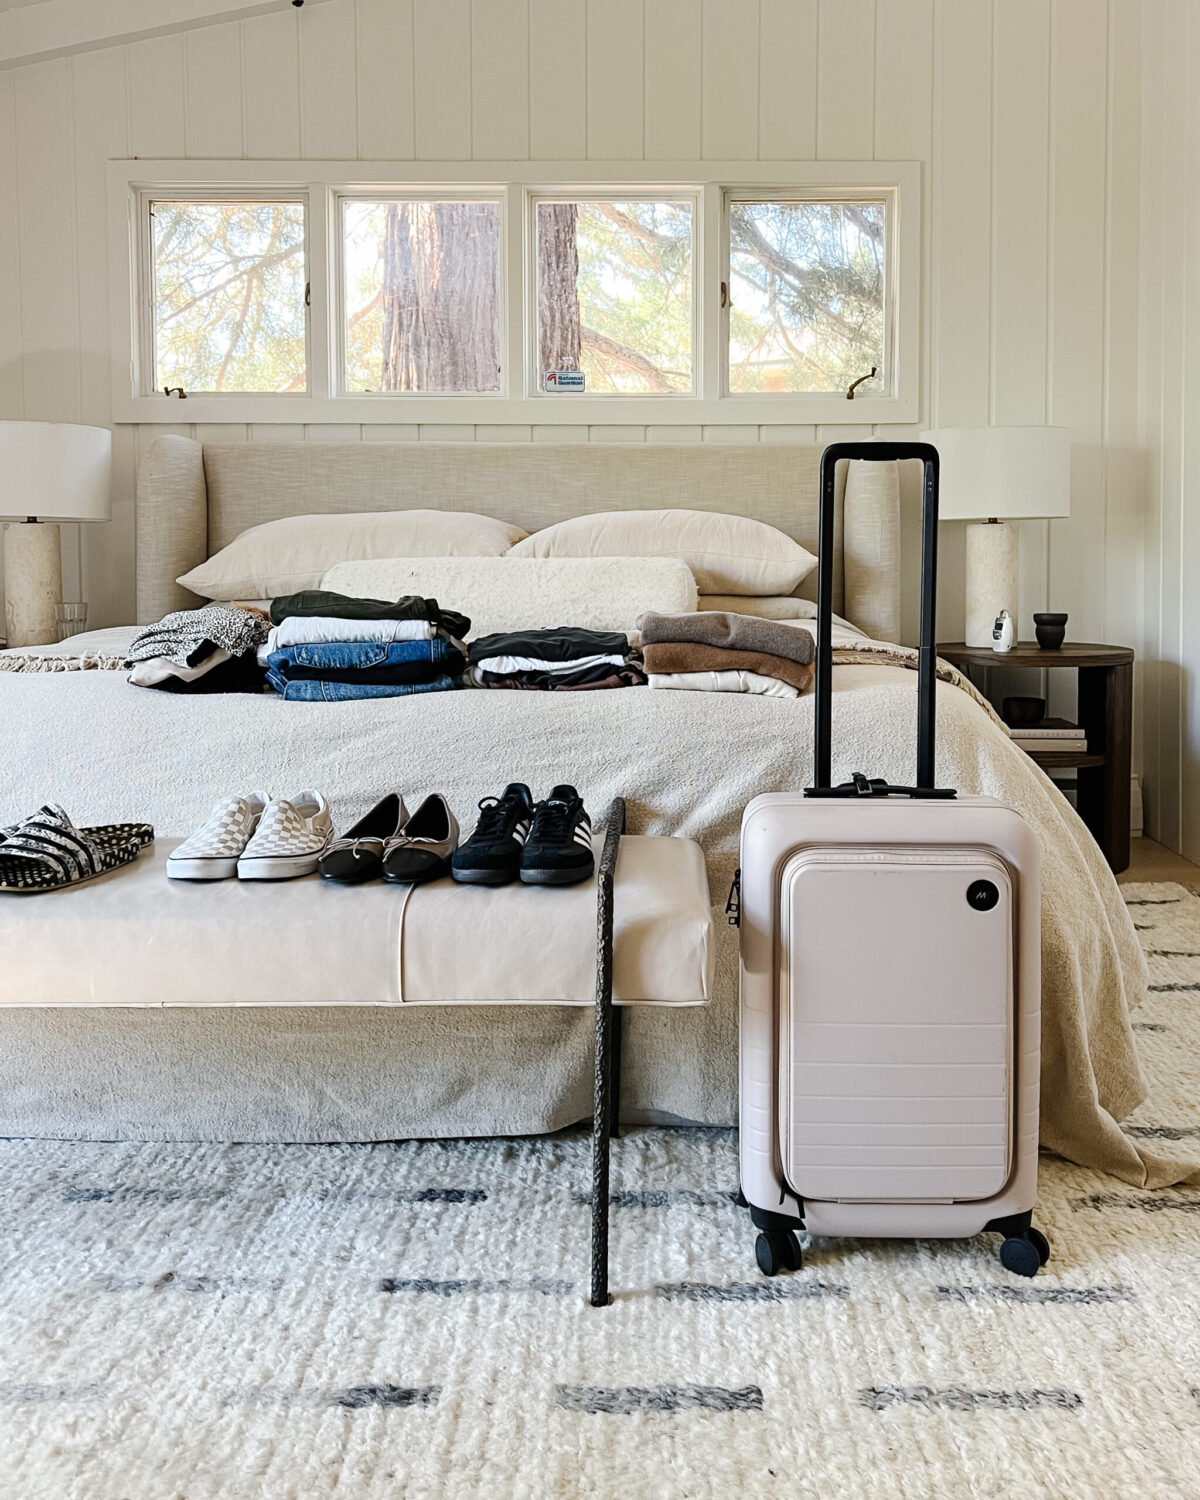 carry on only packing list for minimalist travel